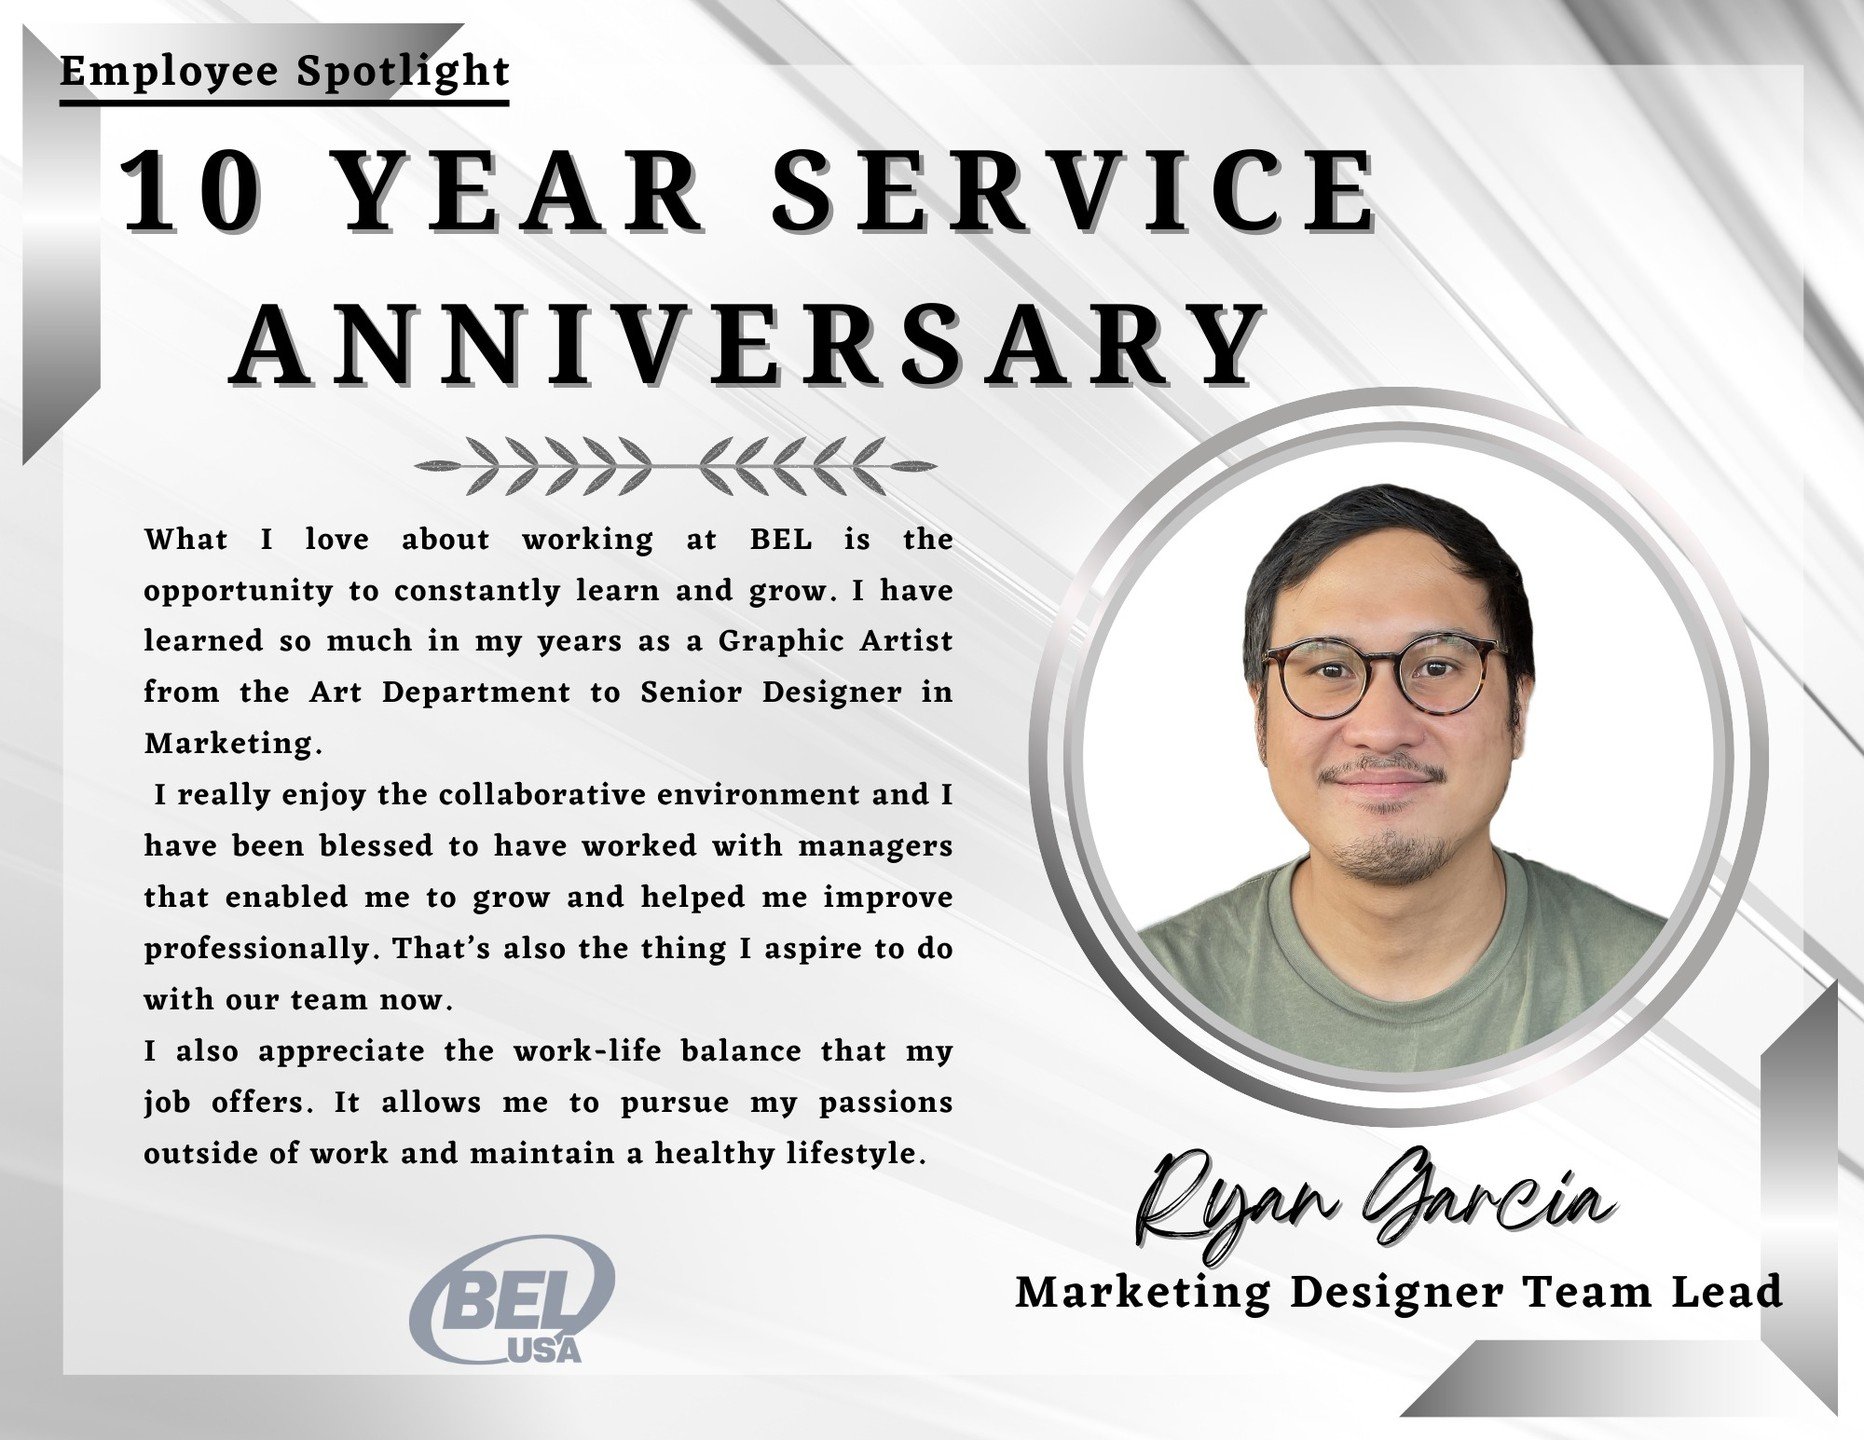 Celebrating 10 Amazing Years with Ryan Garcia! 🎊🎉

Please join us in congratulating Ryan Garcia, our incredible Marketing Designer Team Lead, on his 10th anniversary with us! 🥳

Ryan's creative vision and leadership have been instrumental in shapi